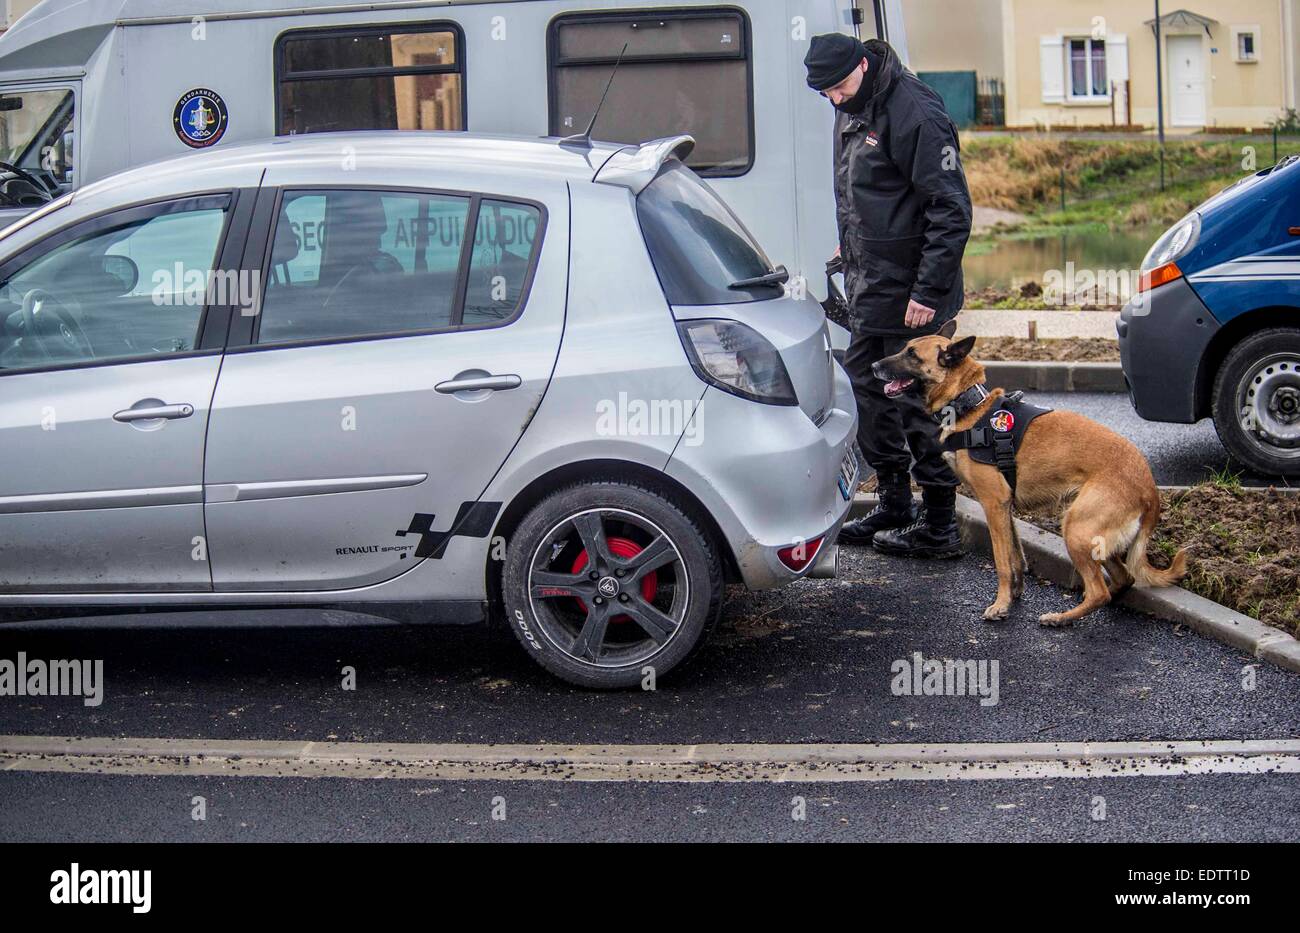 Dammartin-en-Goele, France. 9th January, 2015. A police dog handled by a policeman checks a car in Dammartin-en-Goele, north-east of Paris, where two brothers suspected of Charlie Hebdo attack held one person hostage as police cornered the gunmen, on Jan. 9, 2015. French security force launched assault against Kouachi brothers, killed the two suspects of Charlie Hebdo attack. Credit:  Xinhua/Alamy Live News Stock Photo